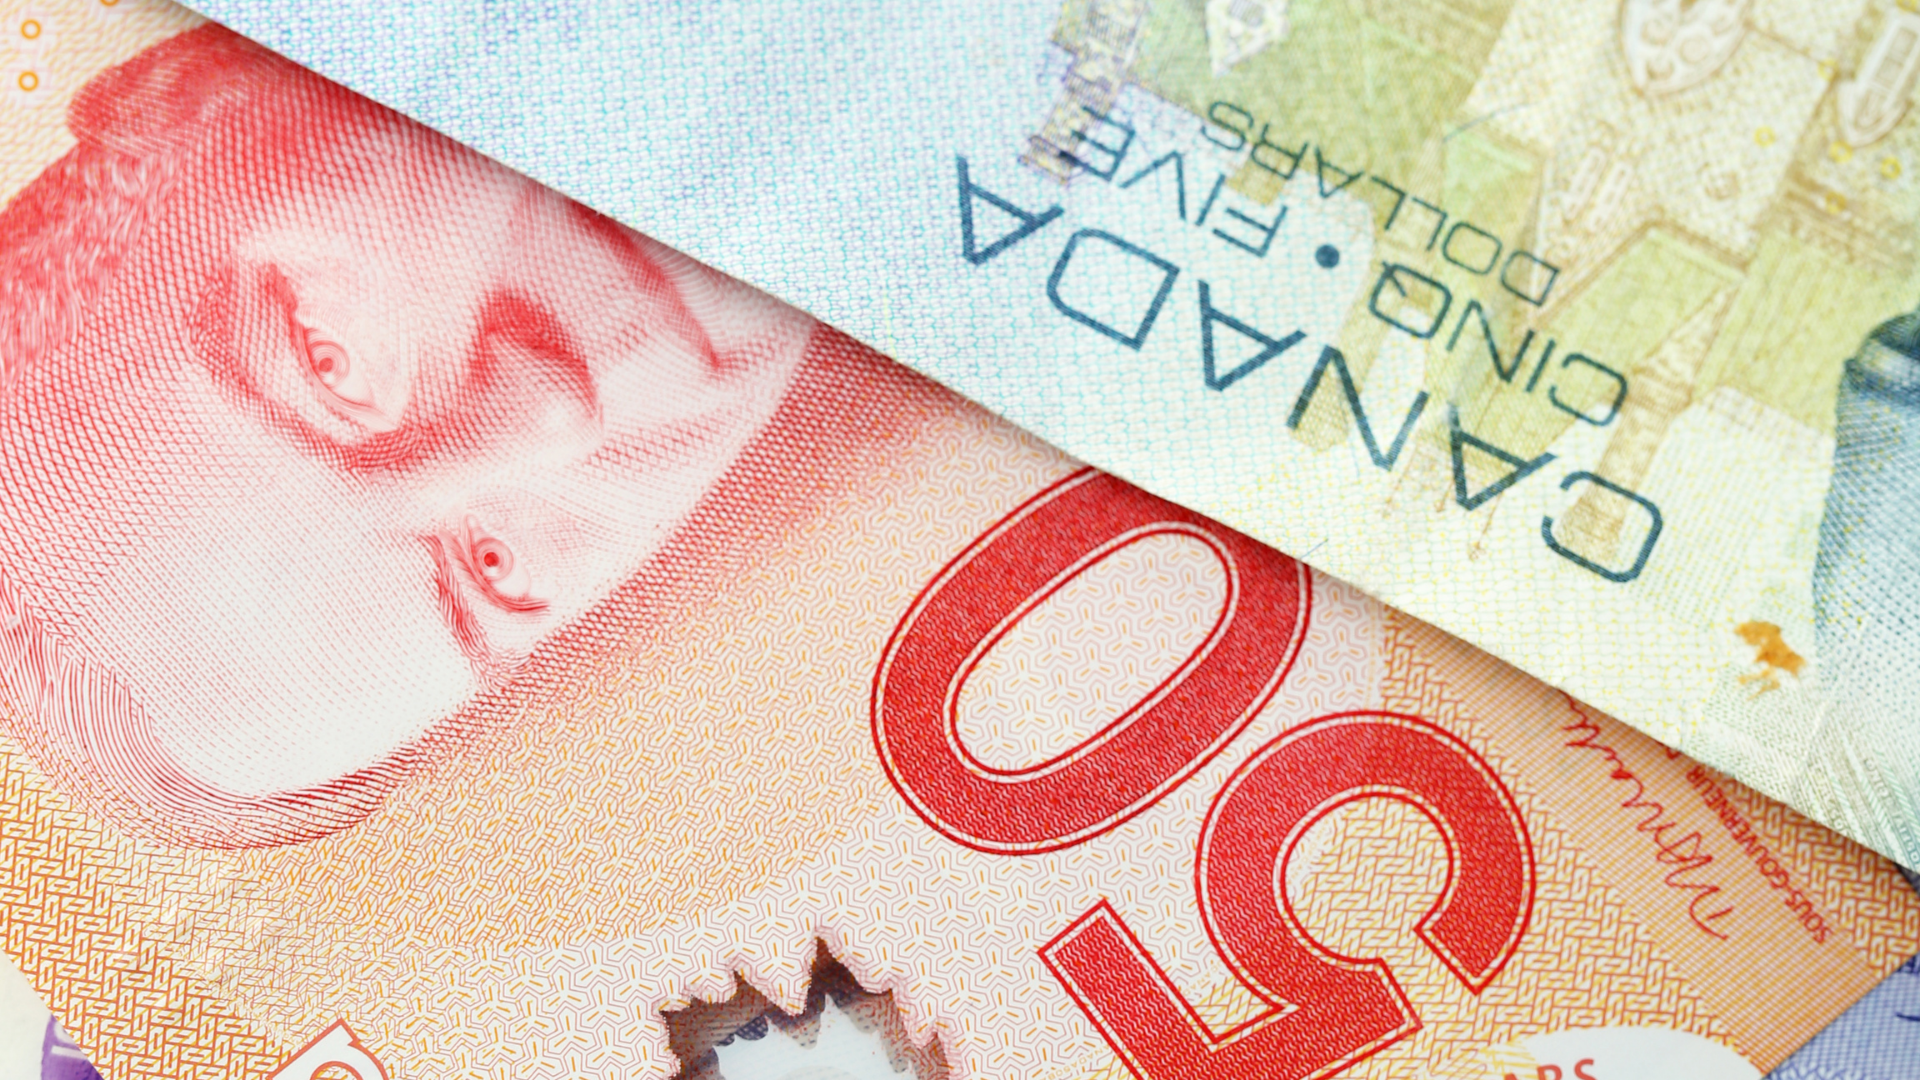 An image of Canadian Money